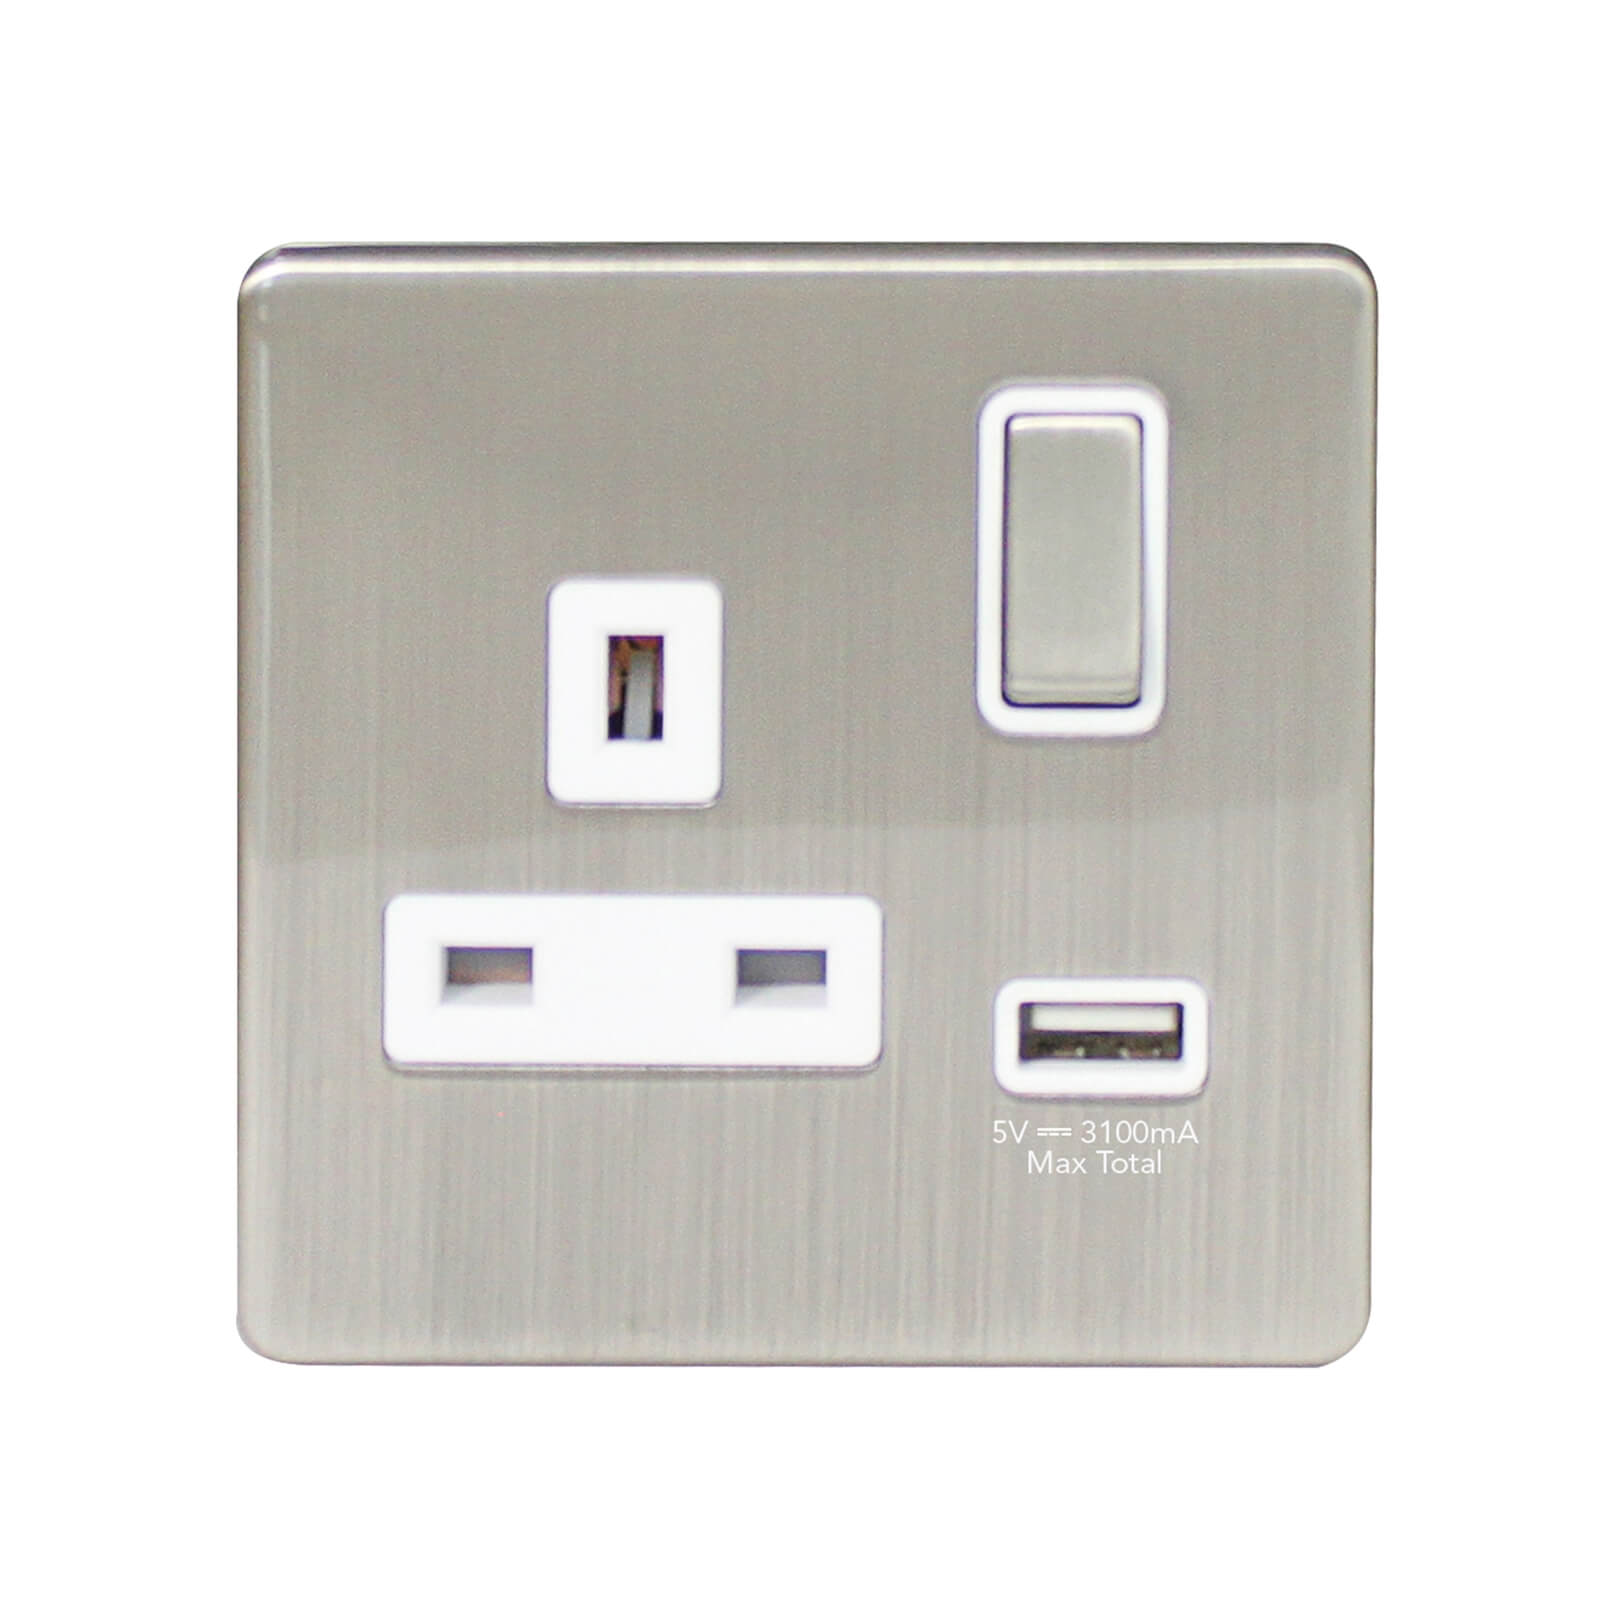 Arlec Metal Screwless 13 Amp 1 Gang Switched Socket with 2 x 2.1 Amp USB Stainless Steel